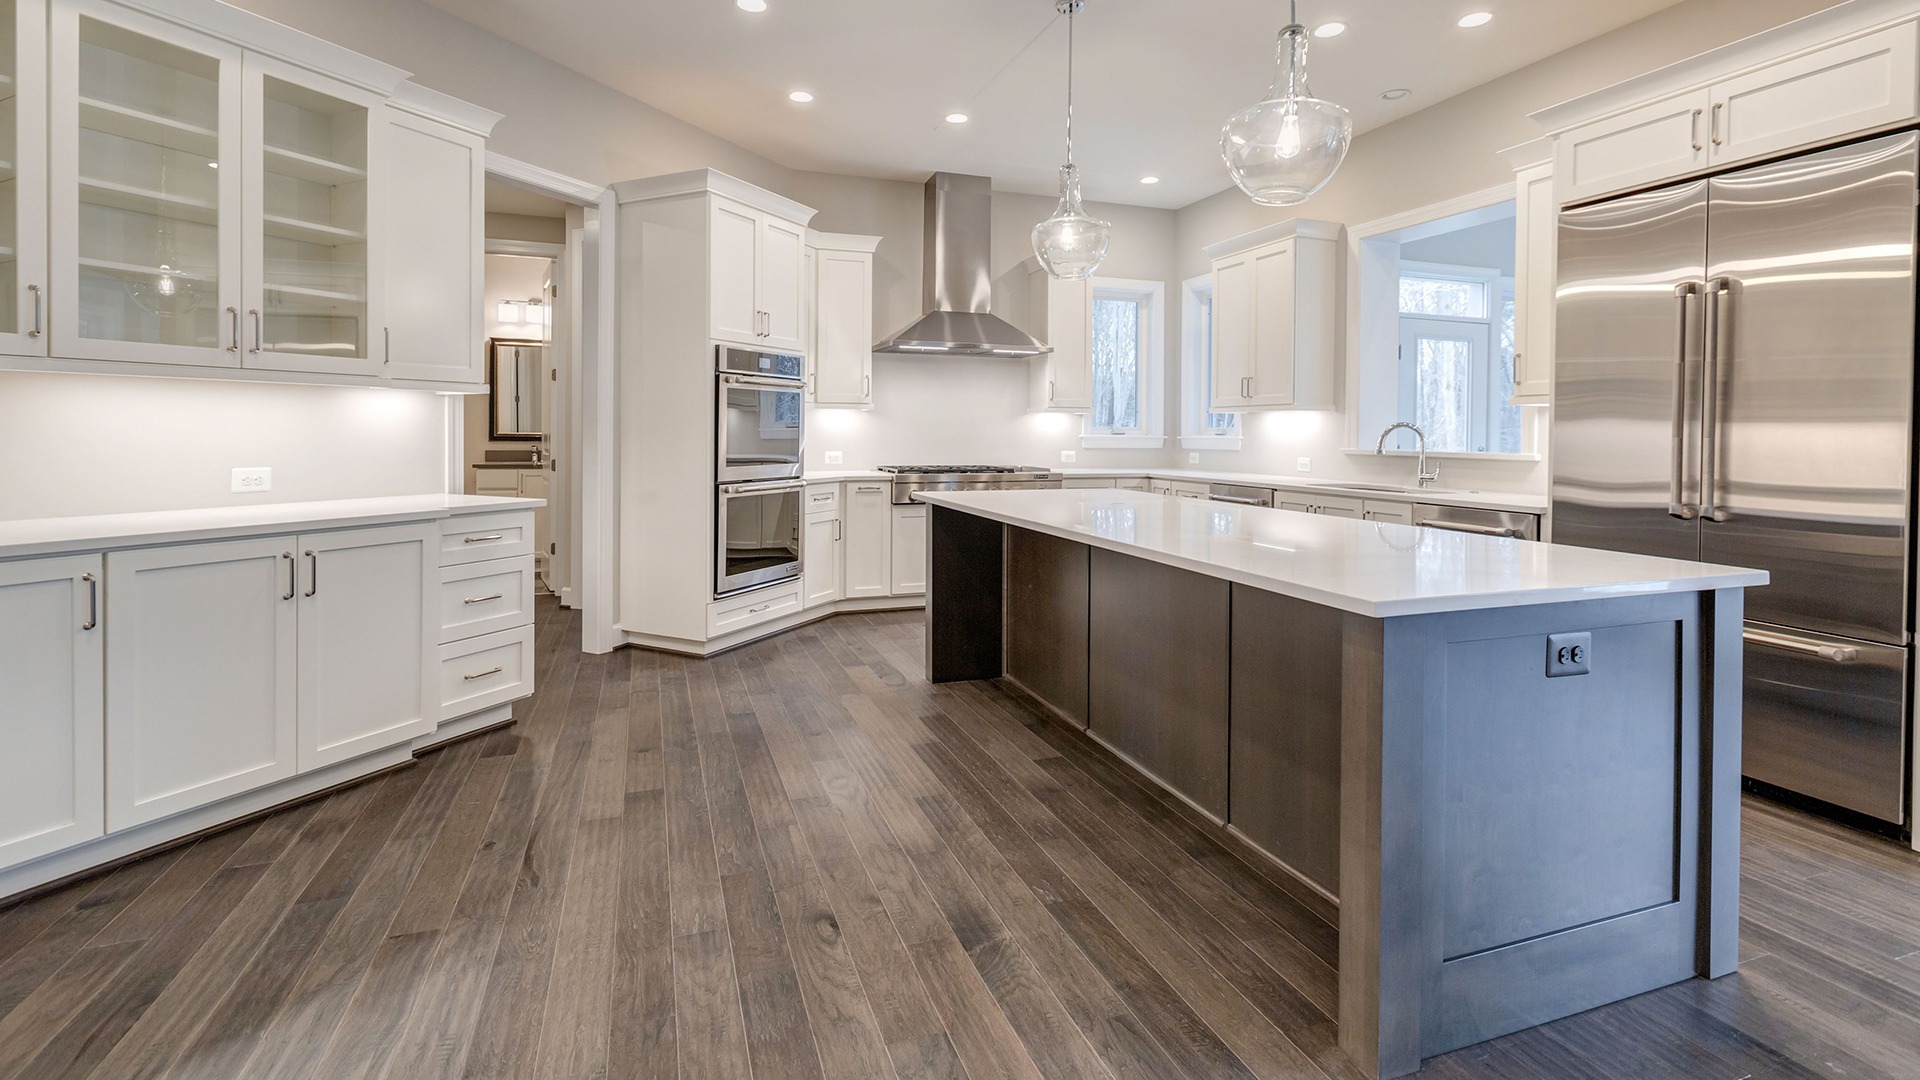 The professional-style Kitchen in the Winthrop on Lot 4 at Thompson's Crossing.